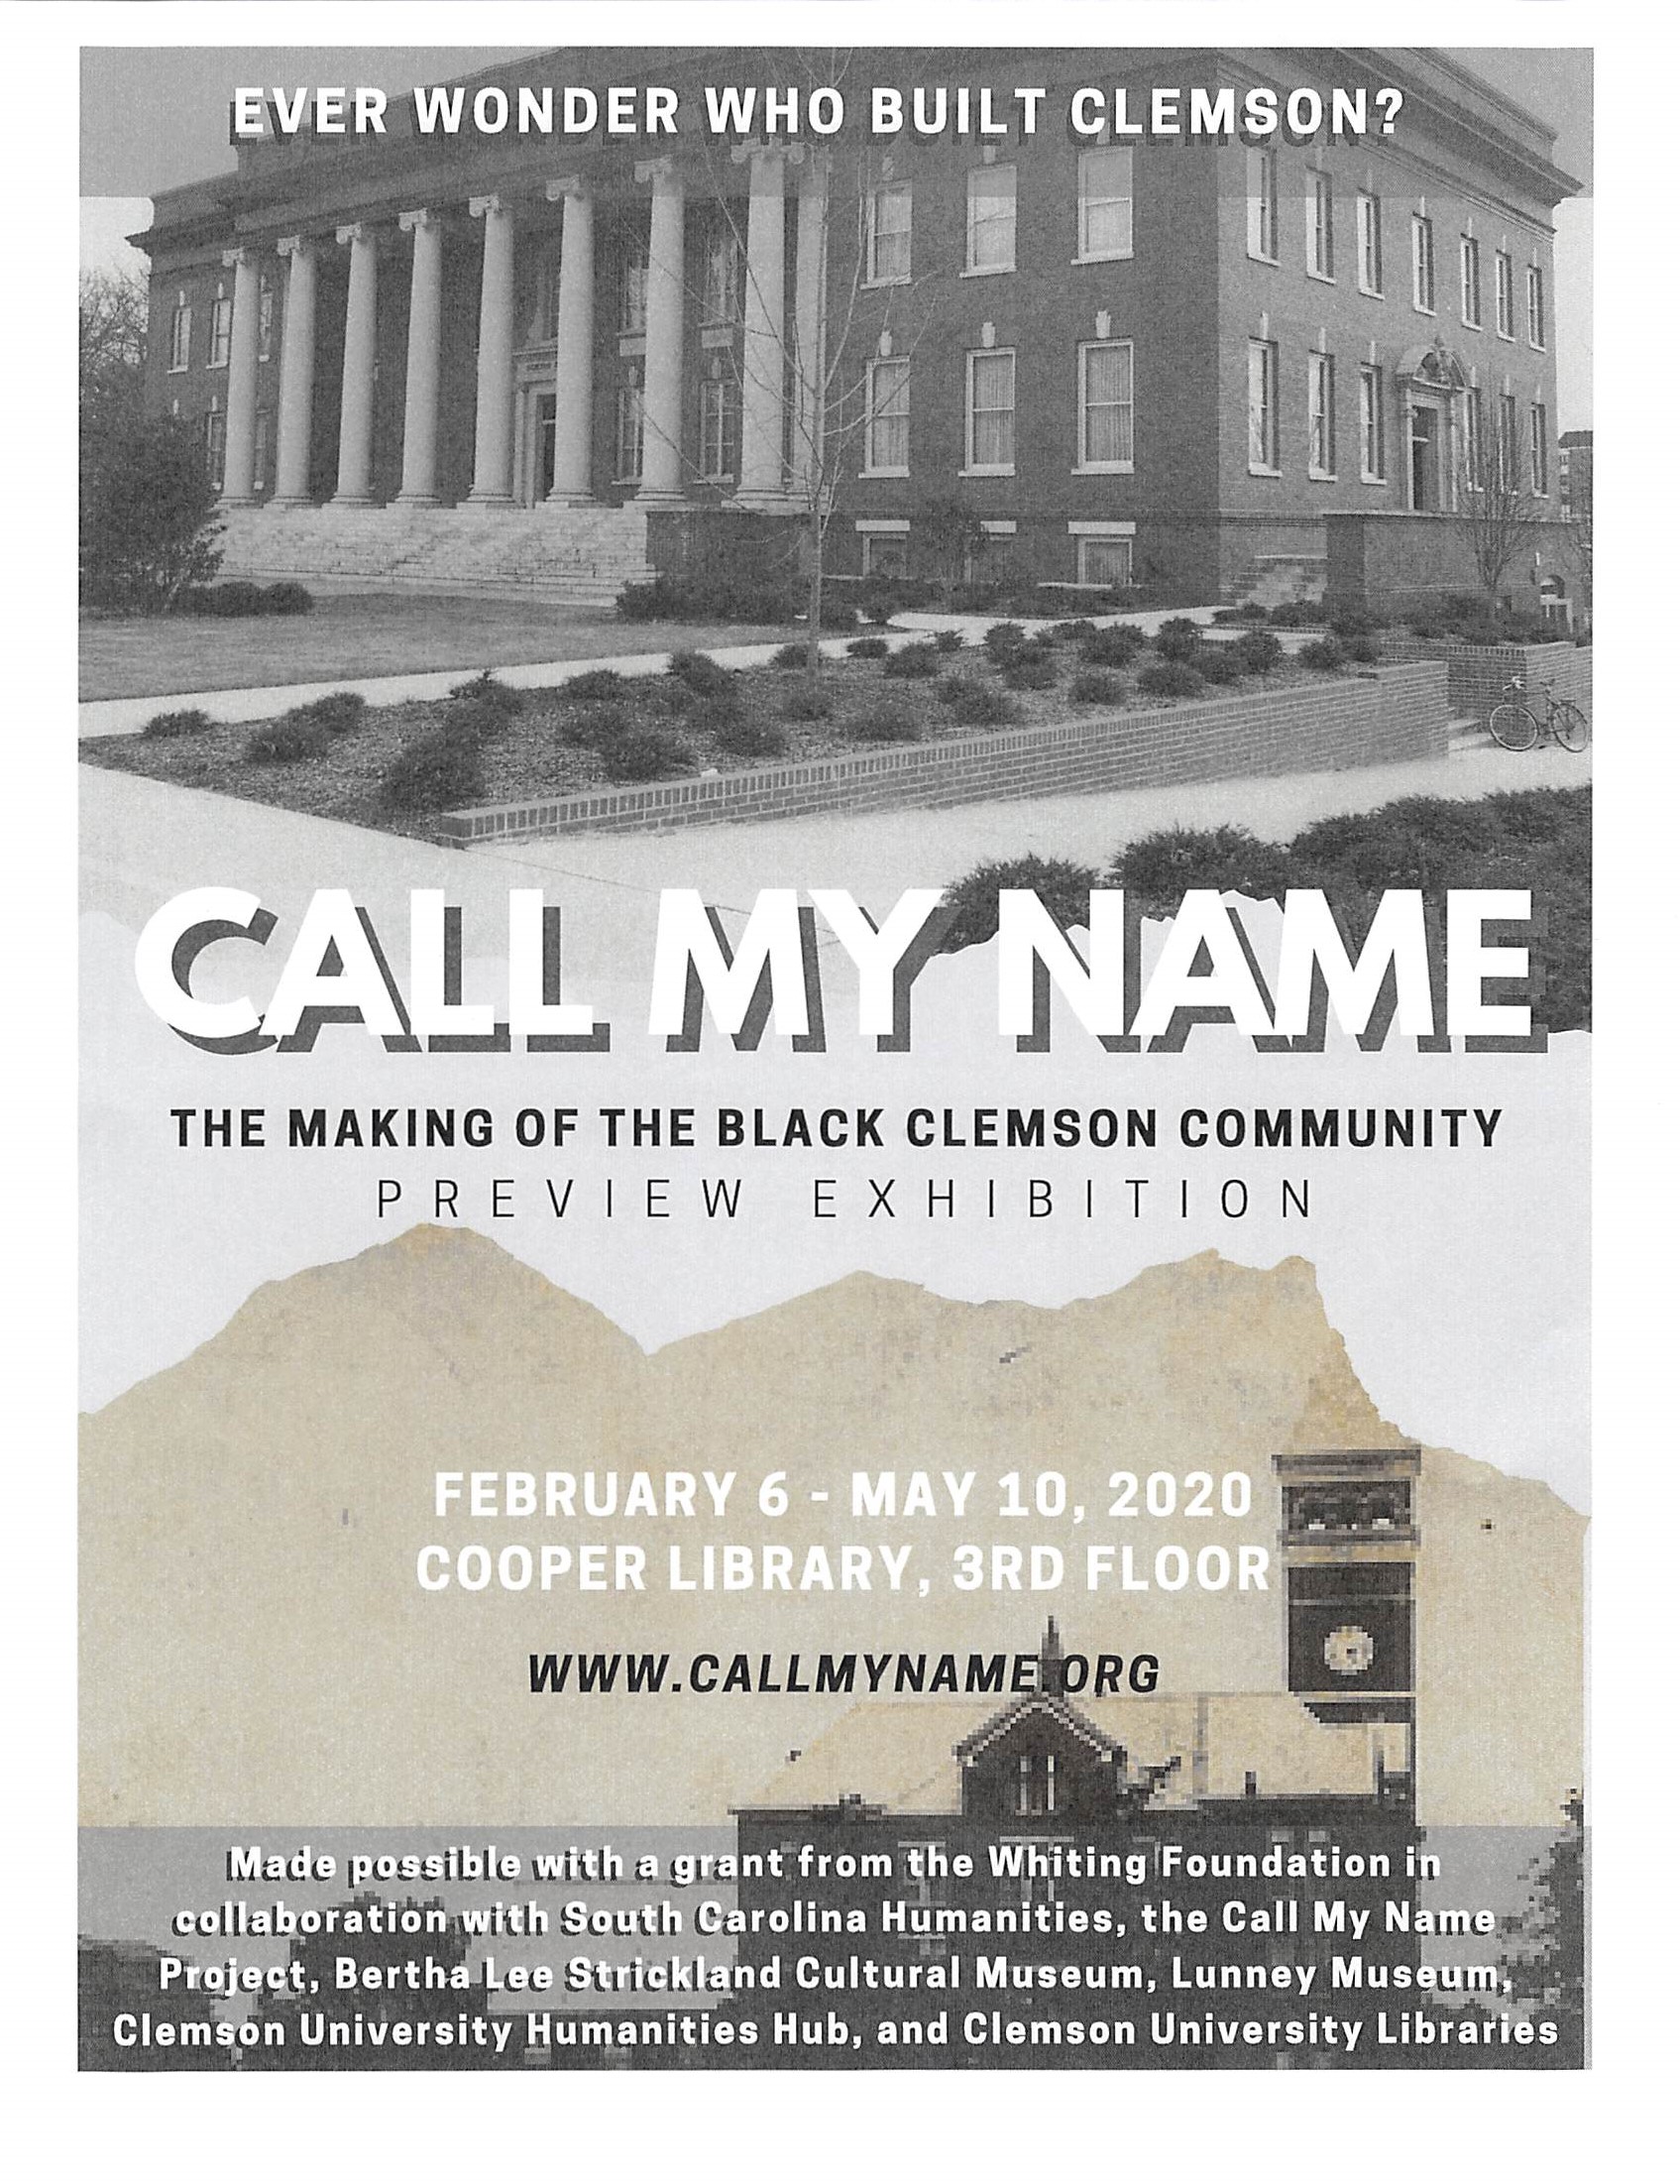 Call My Name: The Making of the Black Clemson Community